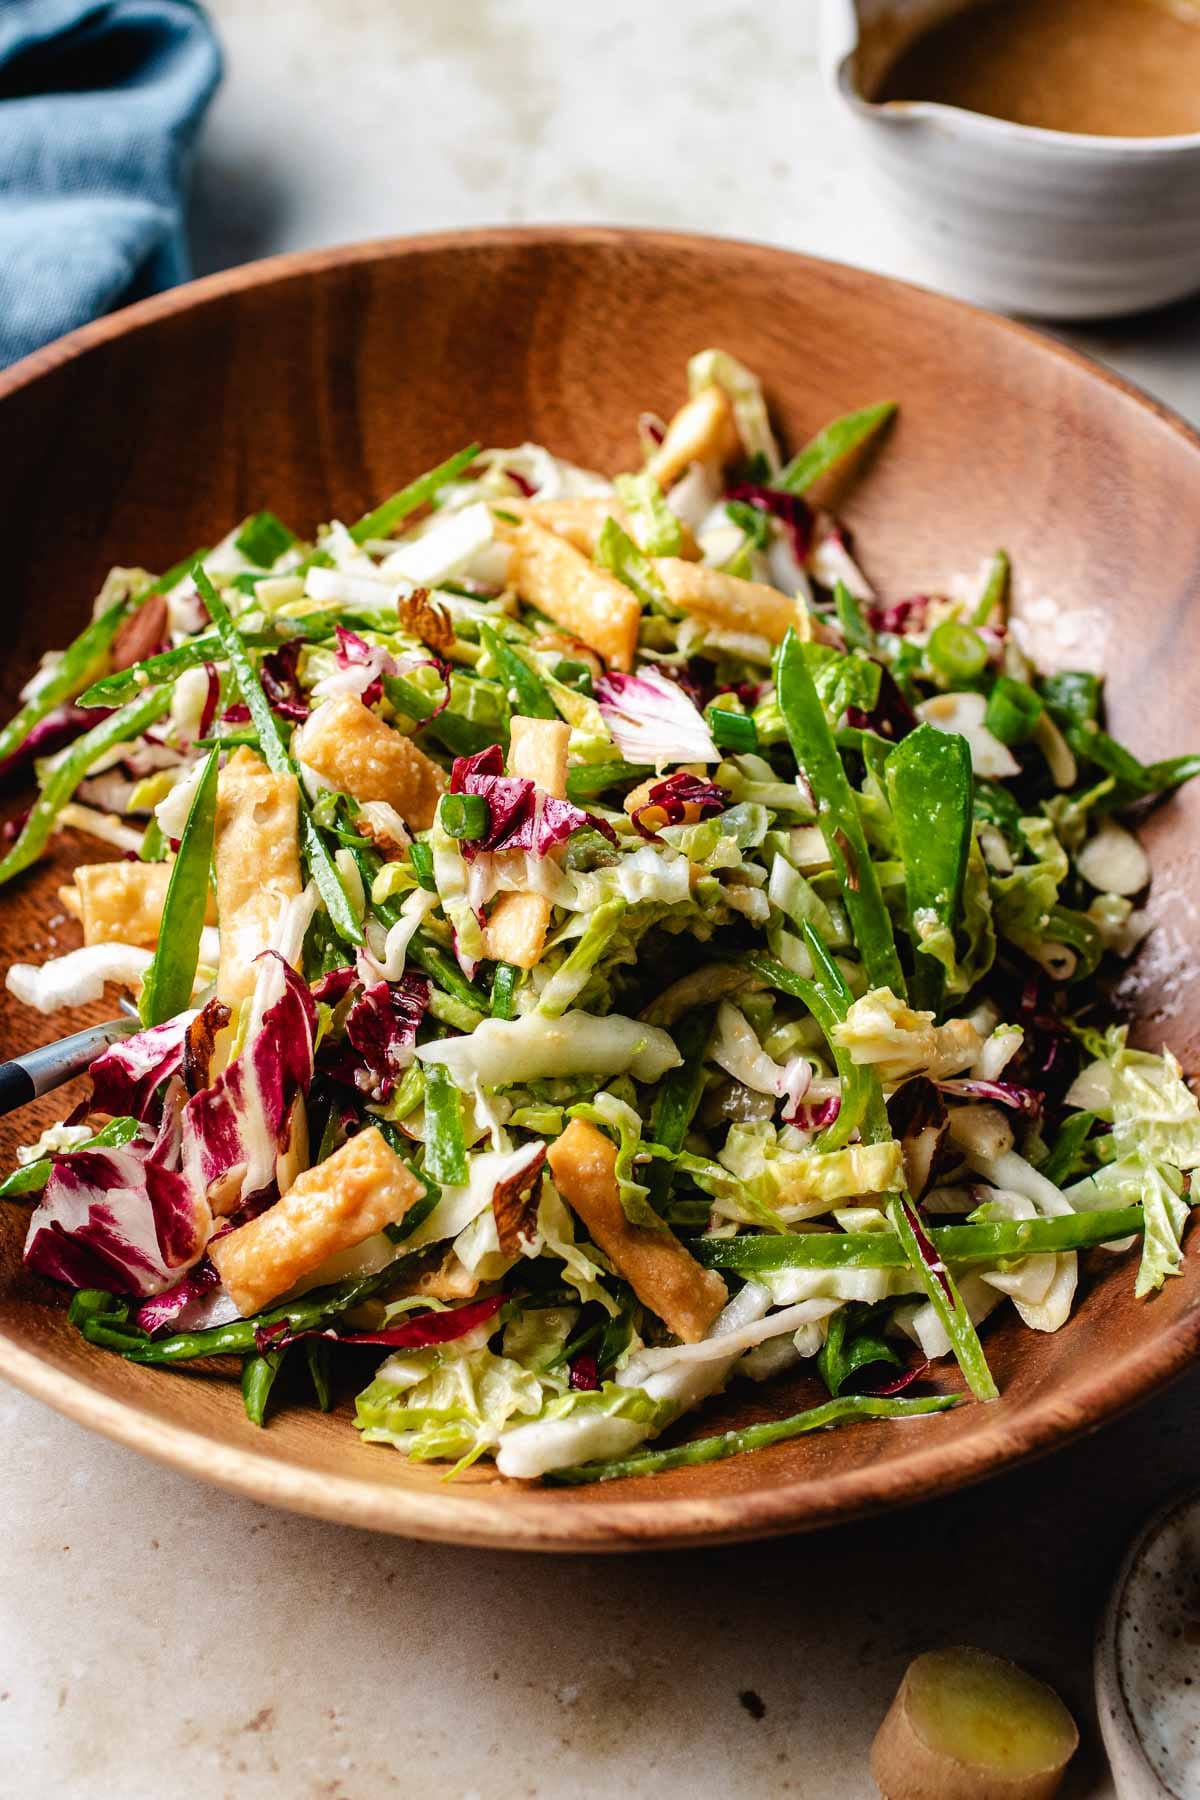 A side shot image shows a bowl of napa cabbage slaw served with miso ginger dressing on the side.